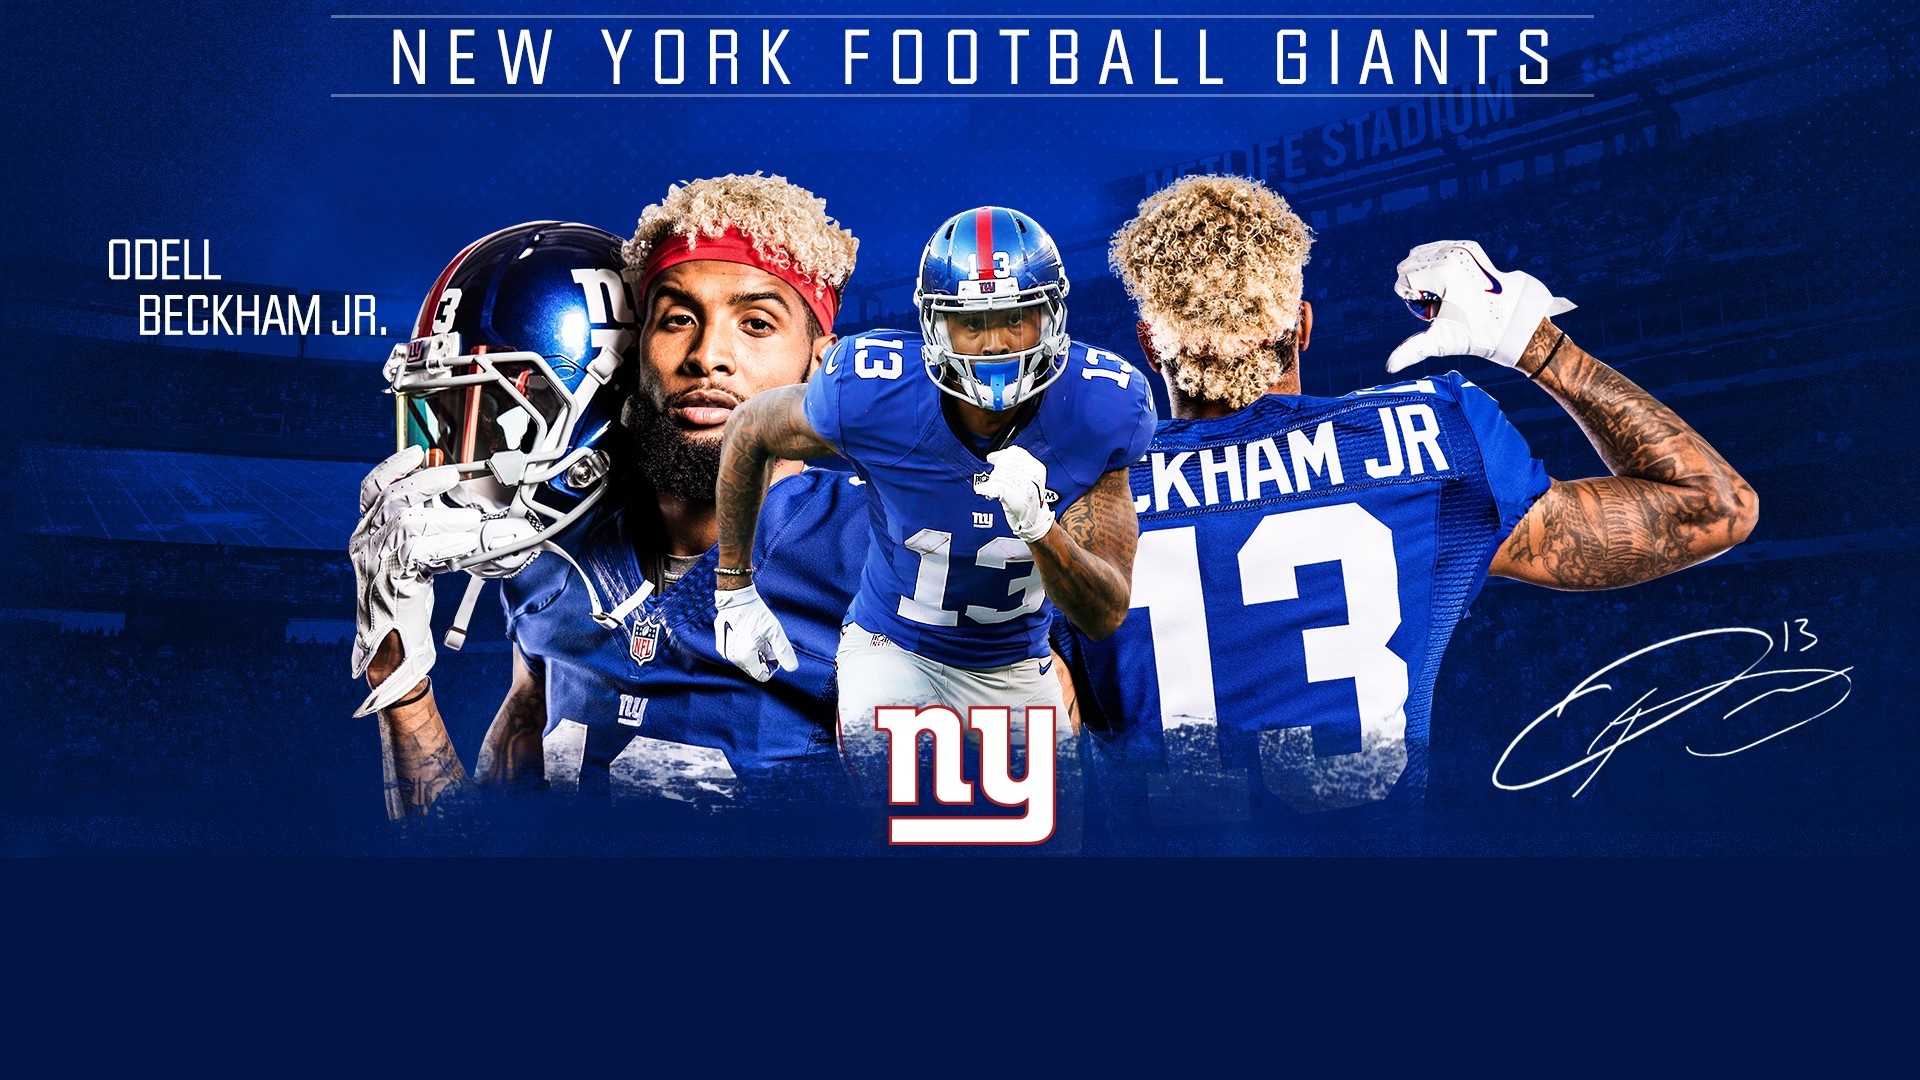 Logos And Uniforms Of The New York Giants - HD Wallpaper 